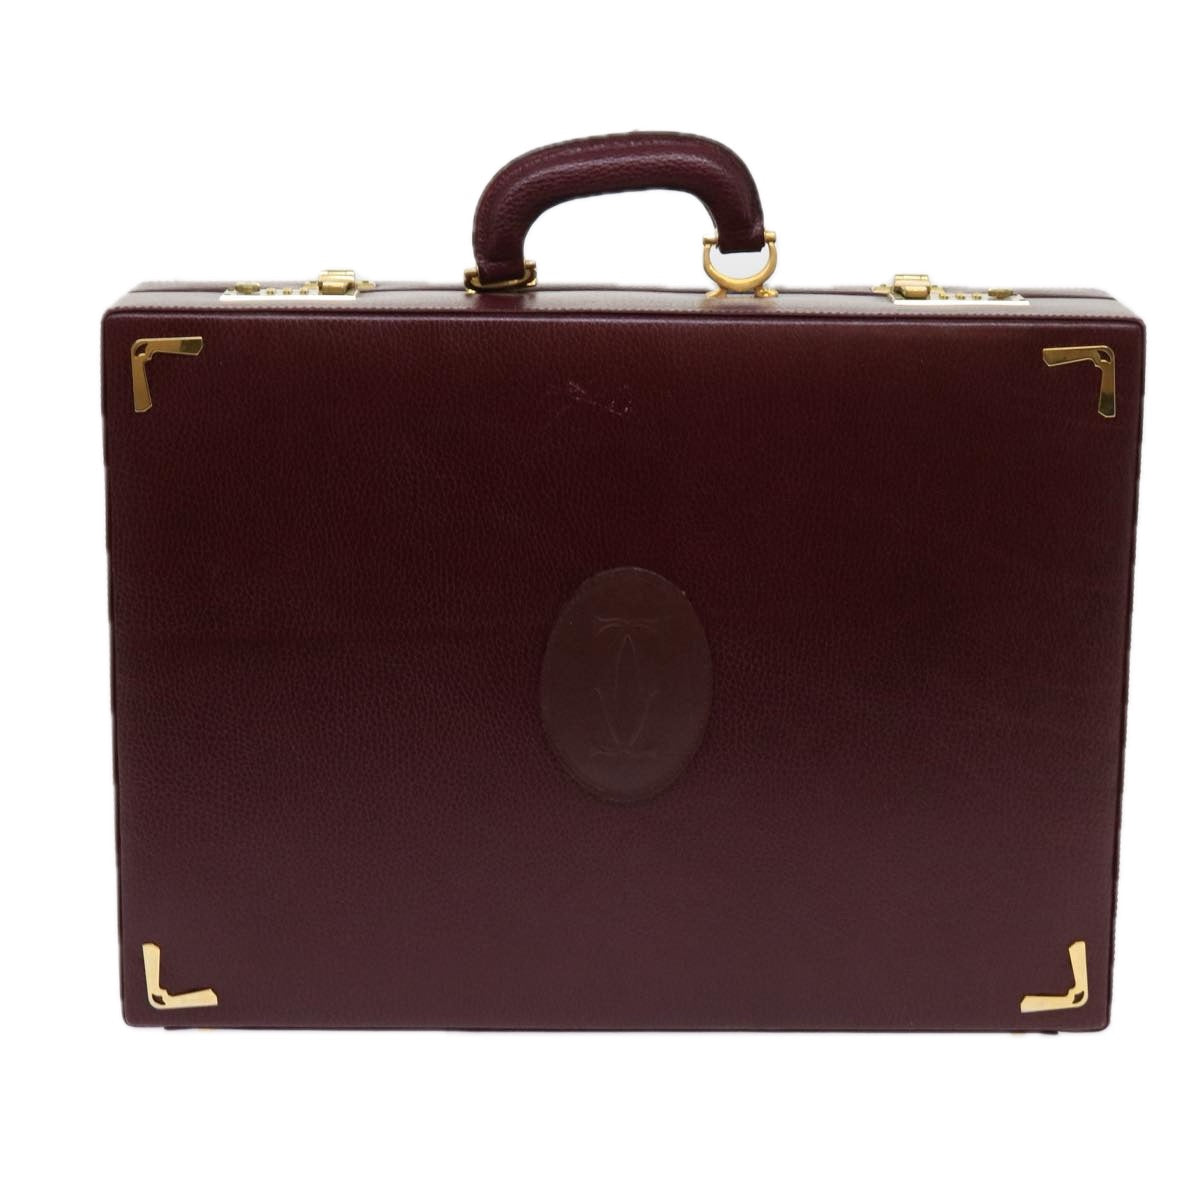 CARTIER Attache Case Trunk Leather Wine Red Auth ar11249